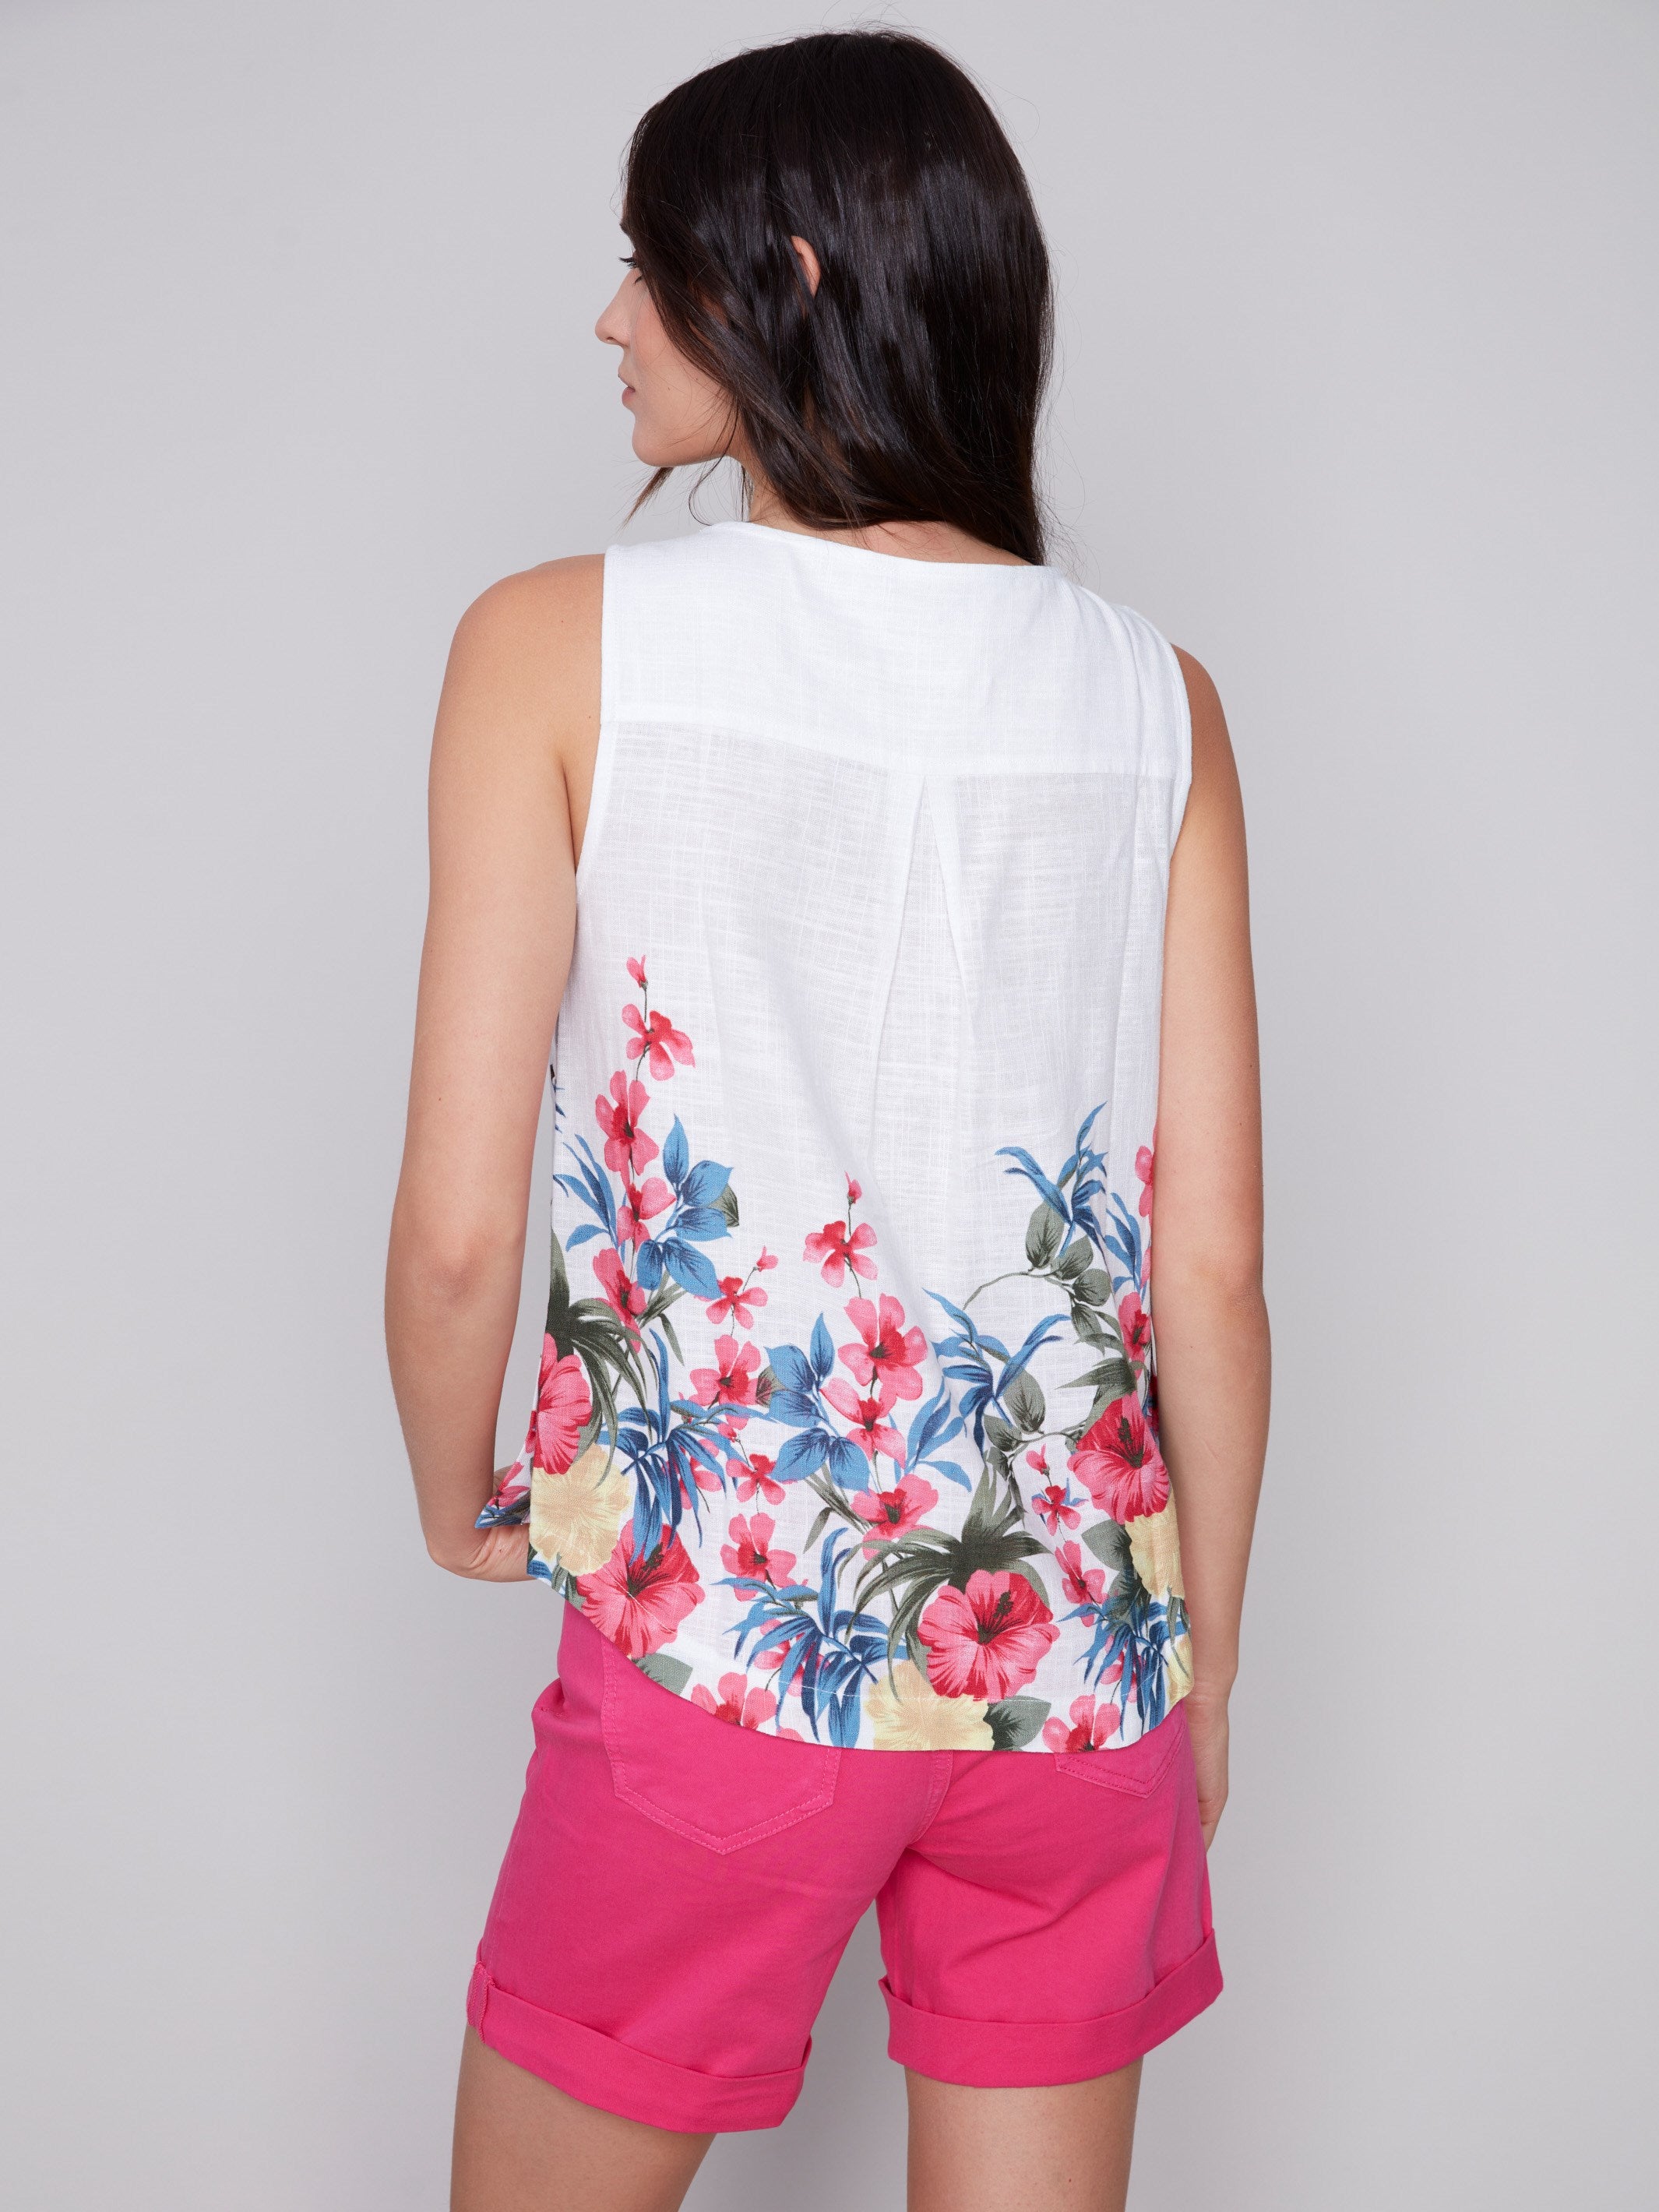 Printed Sleeveless Top with Side Buttons - Maui